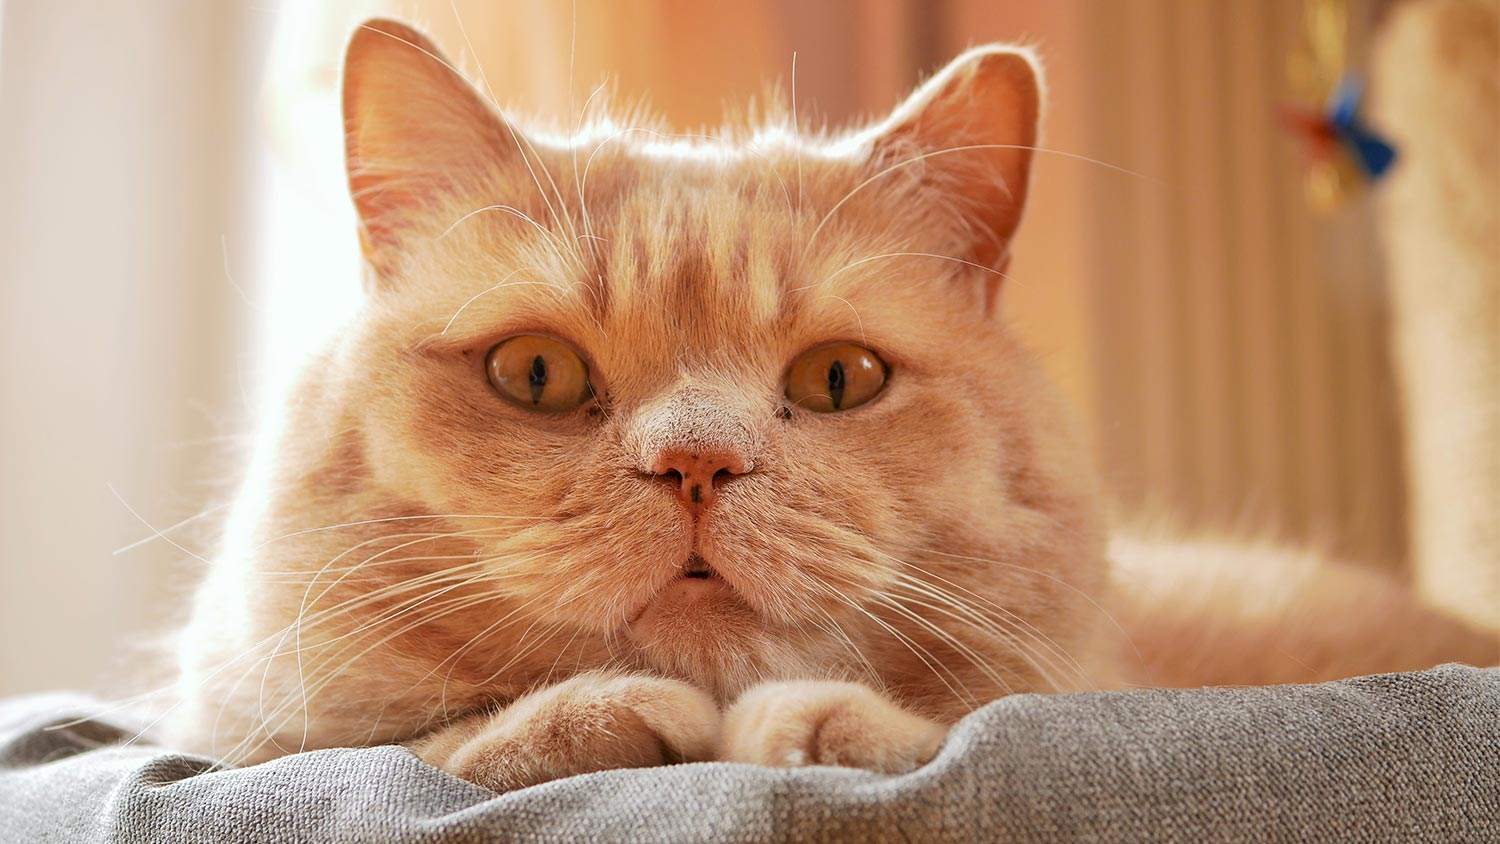 Real Cats That Look Like Garfield